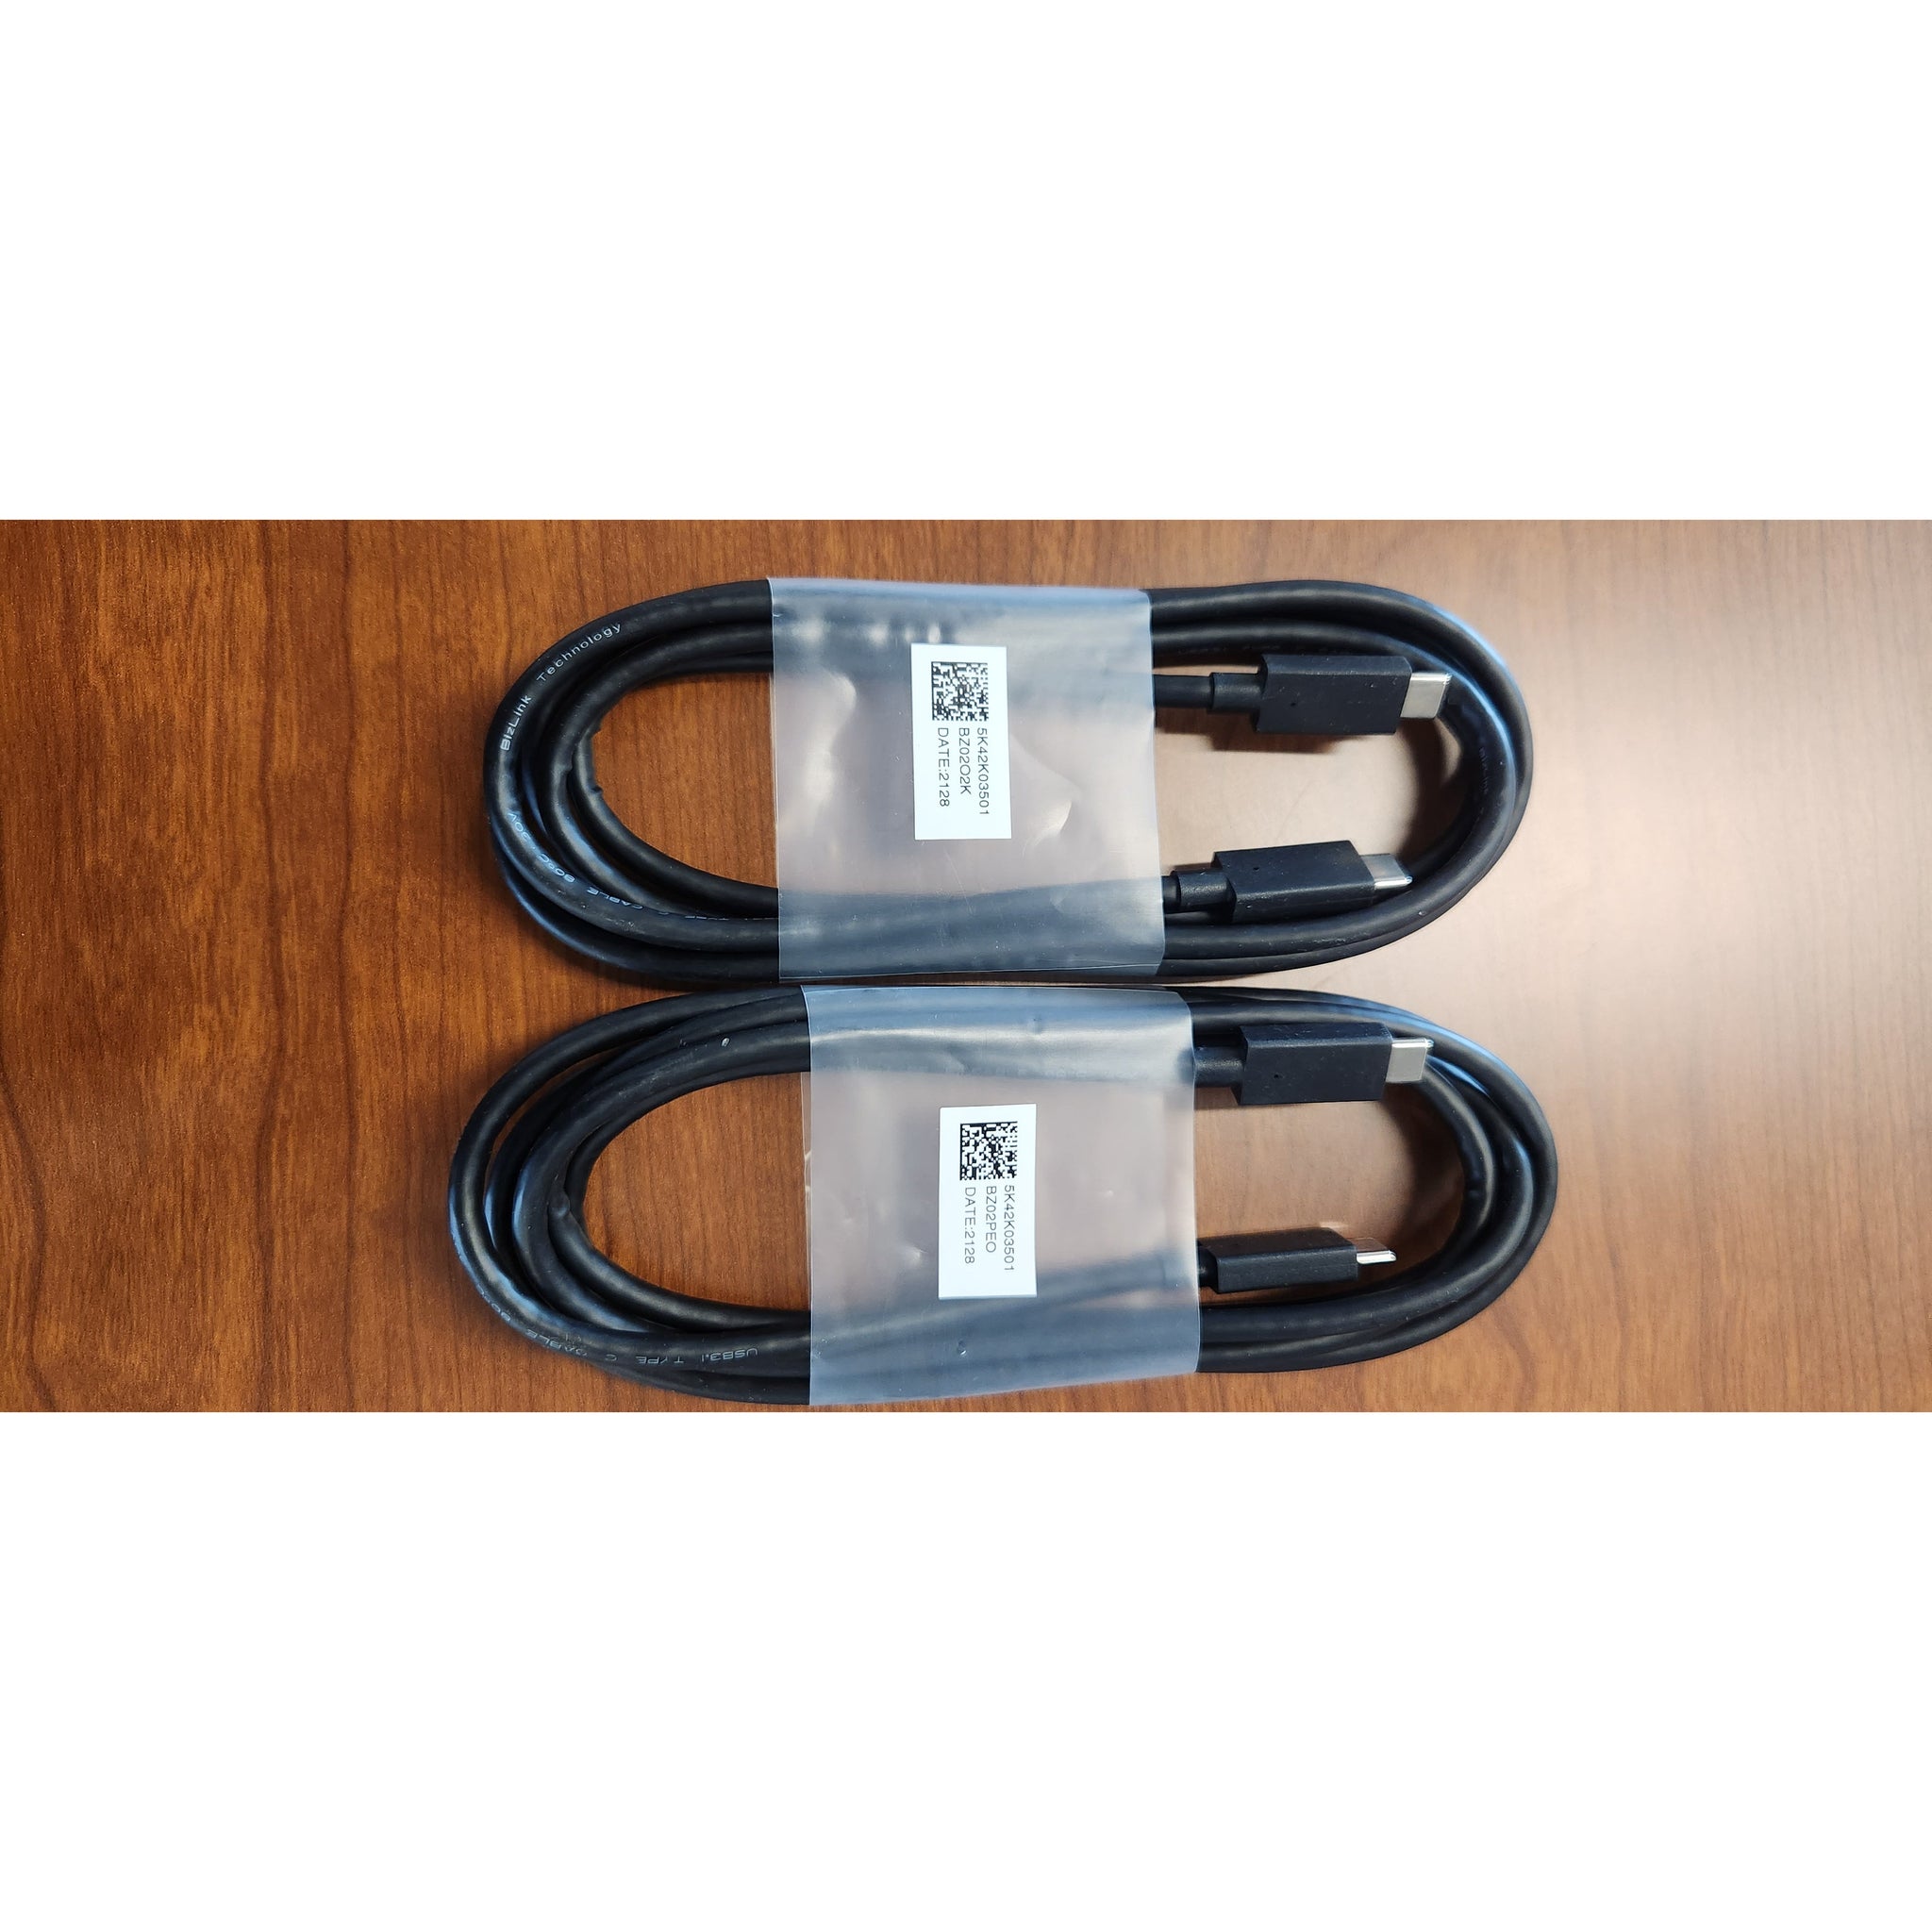 USB-C to USB-C Display Cable or Monitor Cable "Genuine Dell" 6ft